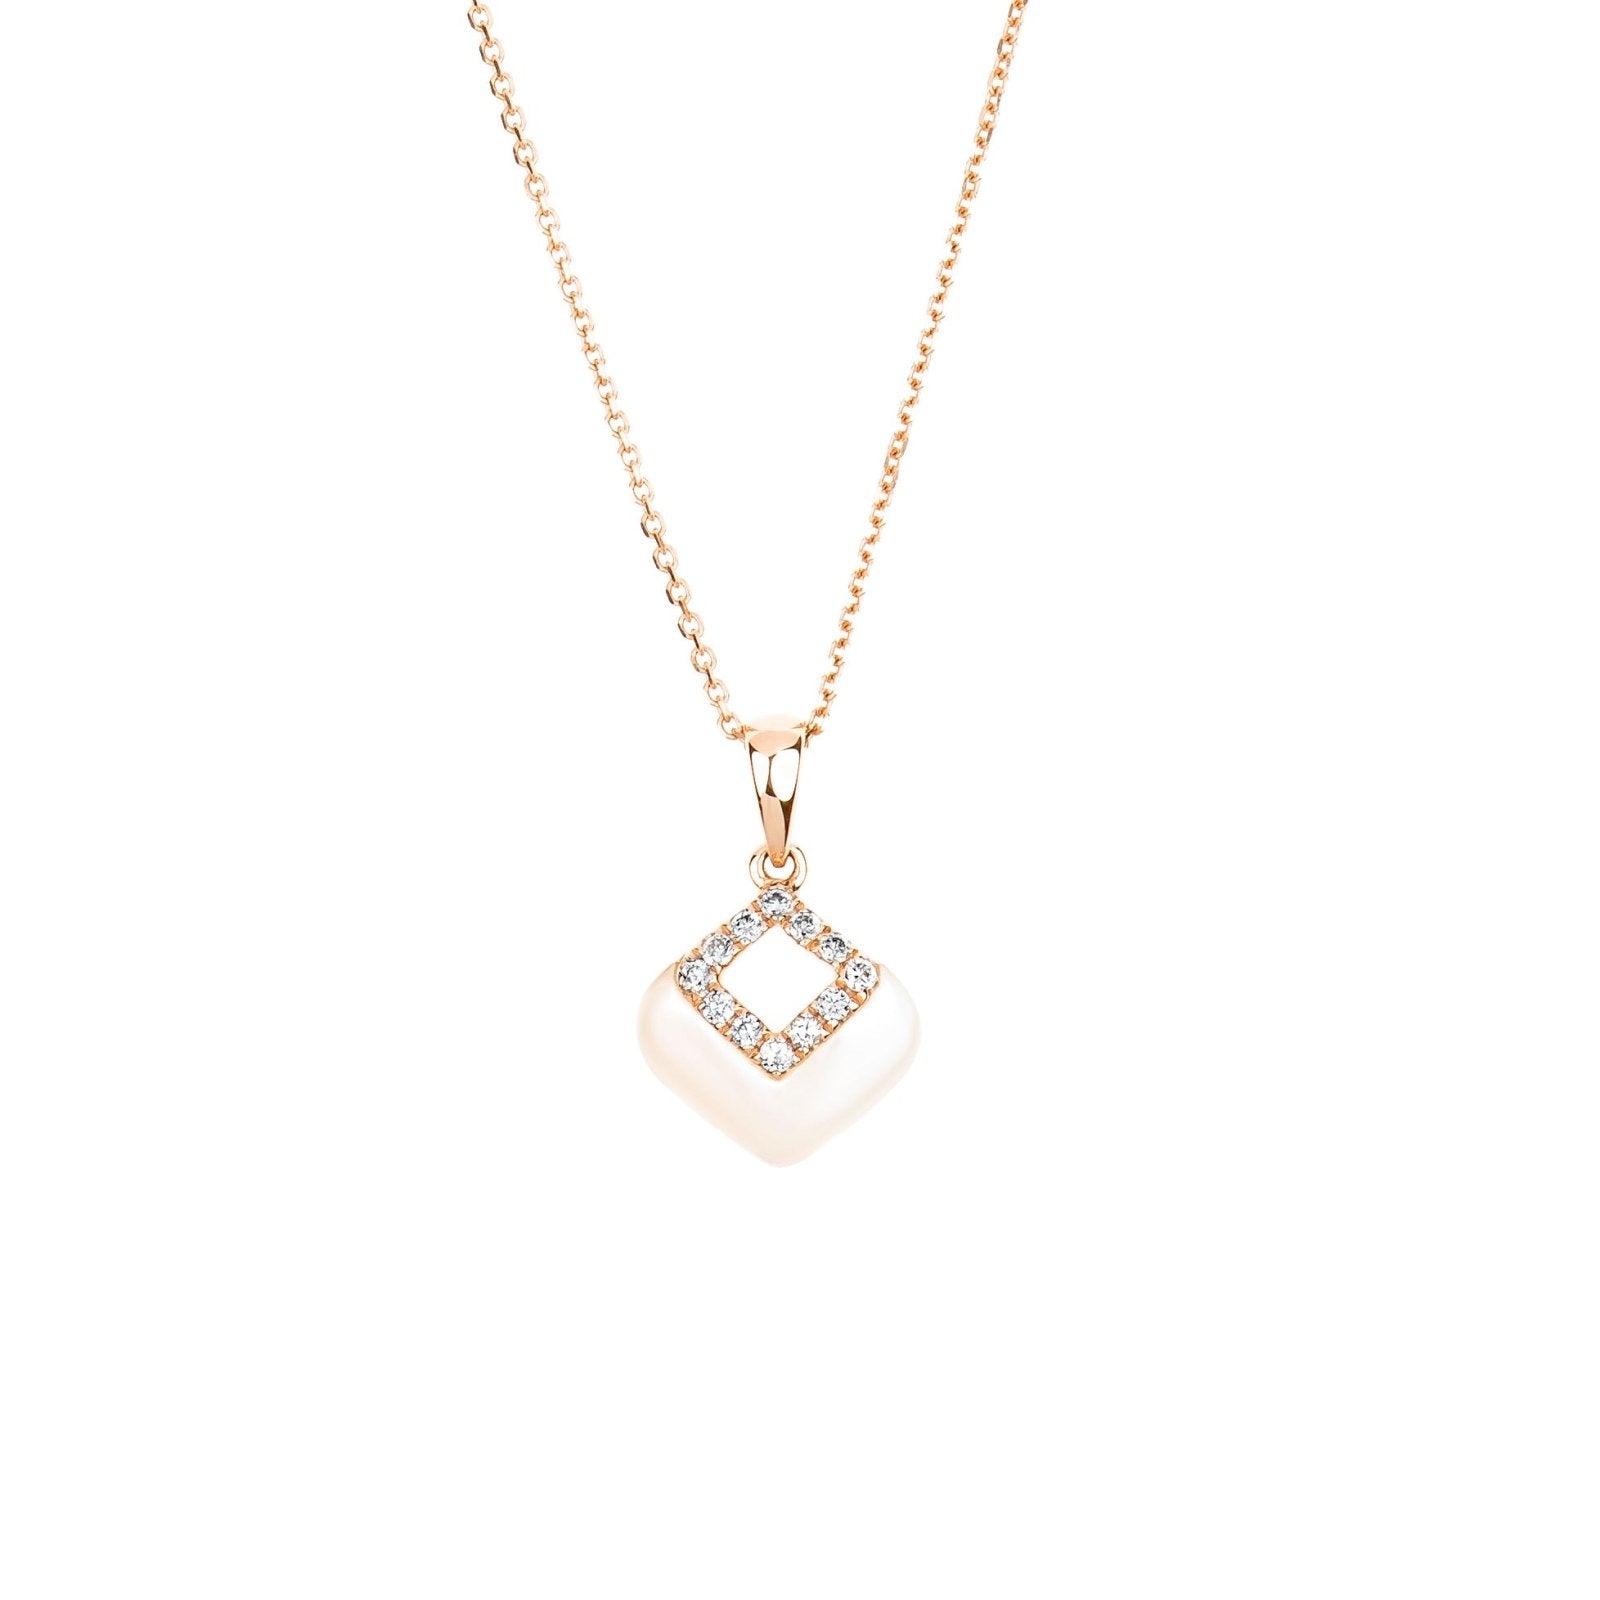 Mother of Pearl and Diamond Cutout Pendant Necklace Necklaces Estella Collection 17211 14k Birthstone Diamond #tag4# #tag5# #tag6# #tag7# #tag8# #tag9# #tag10# 14K Rose Gold